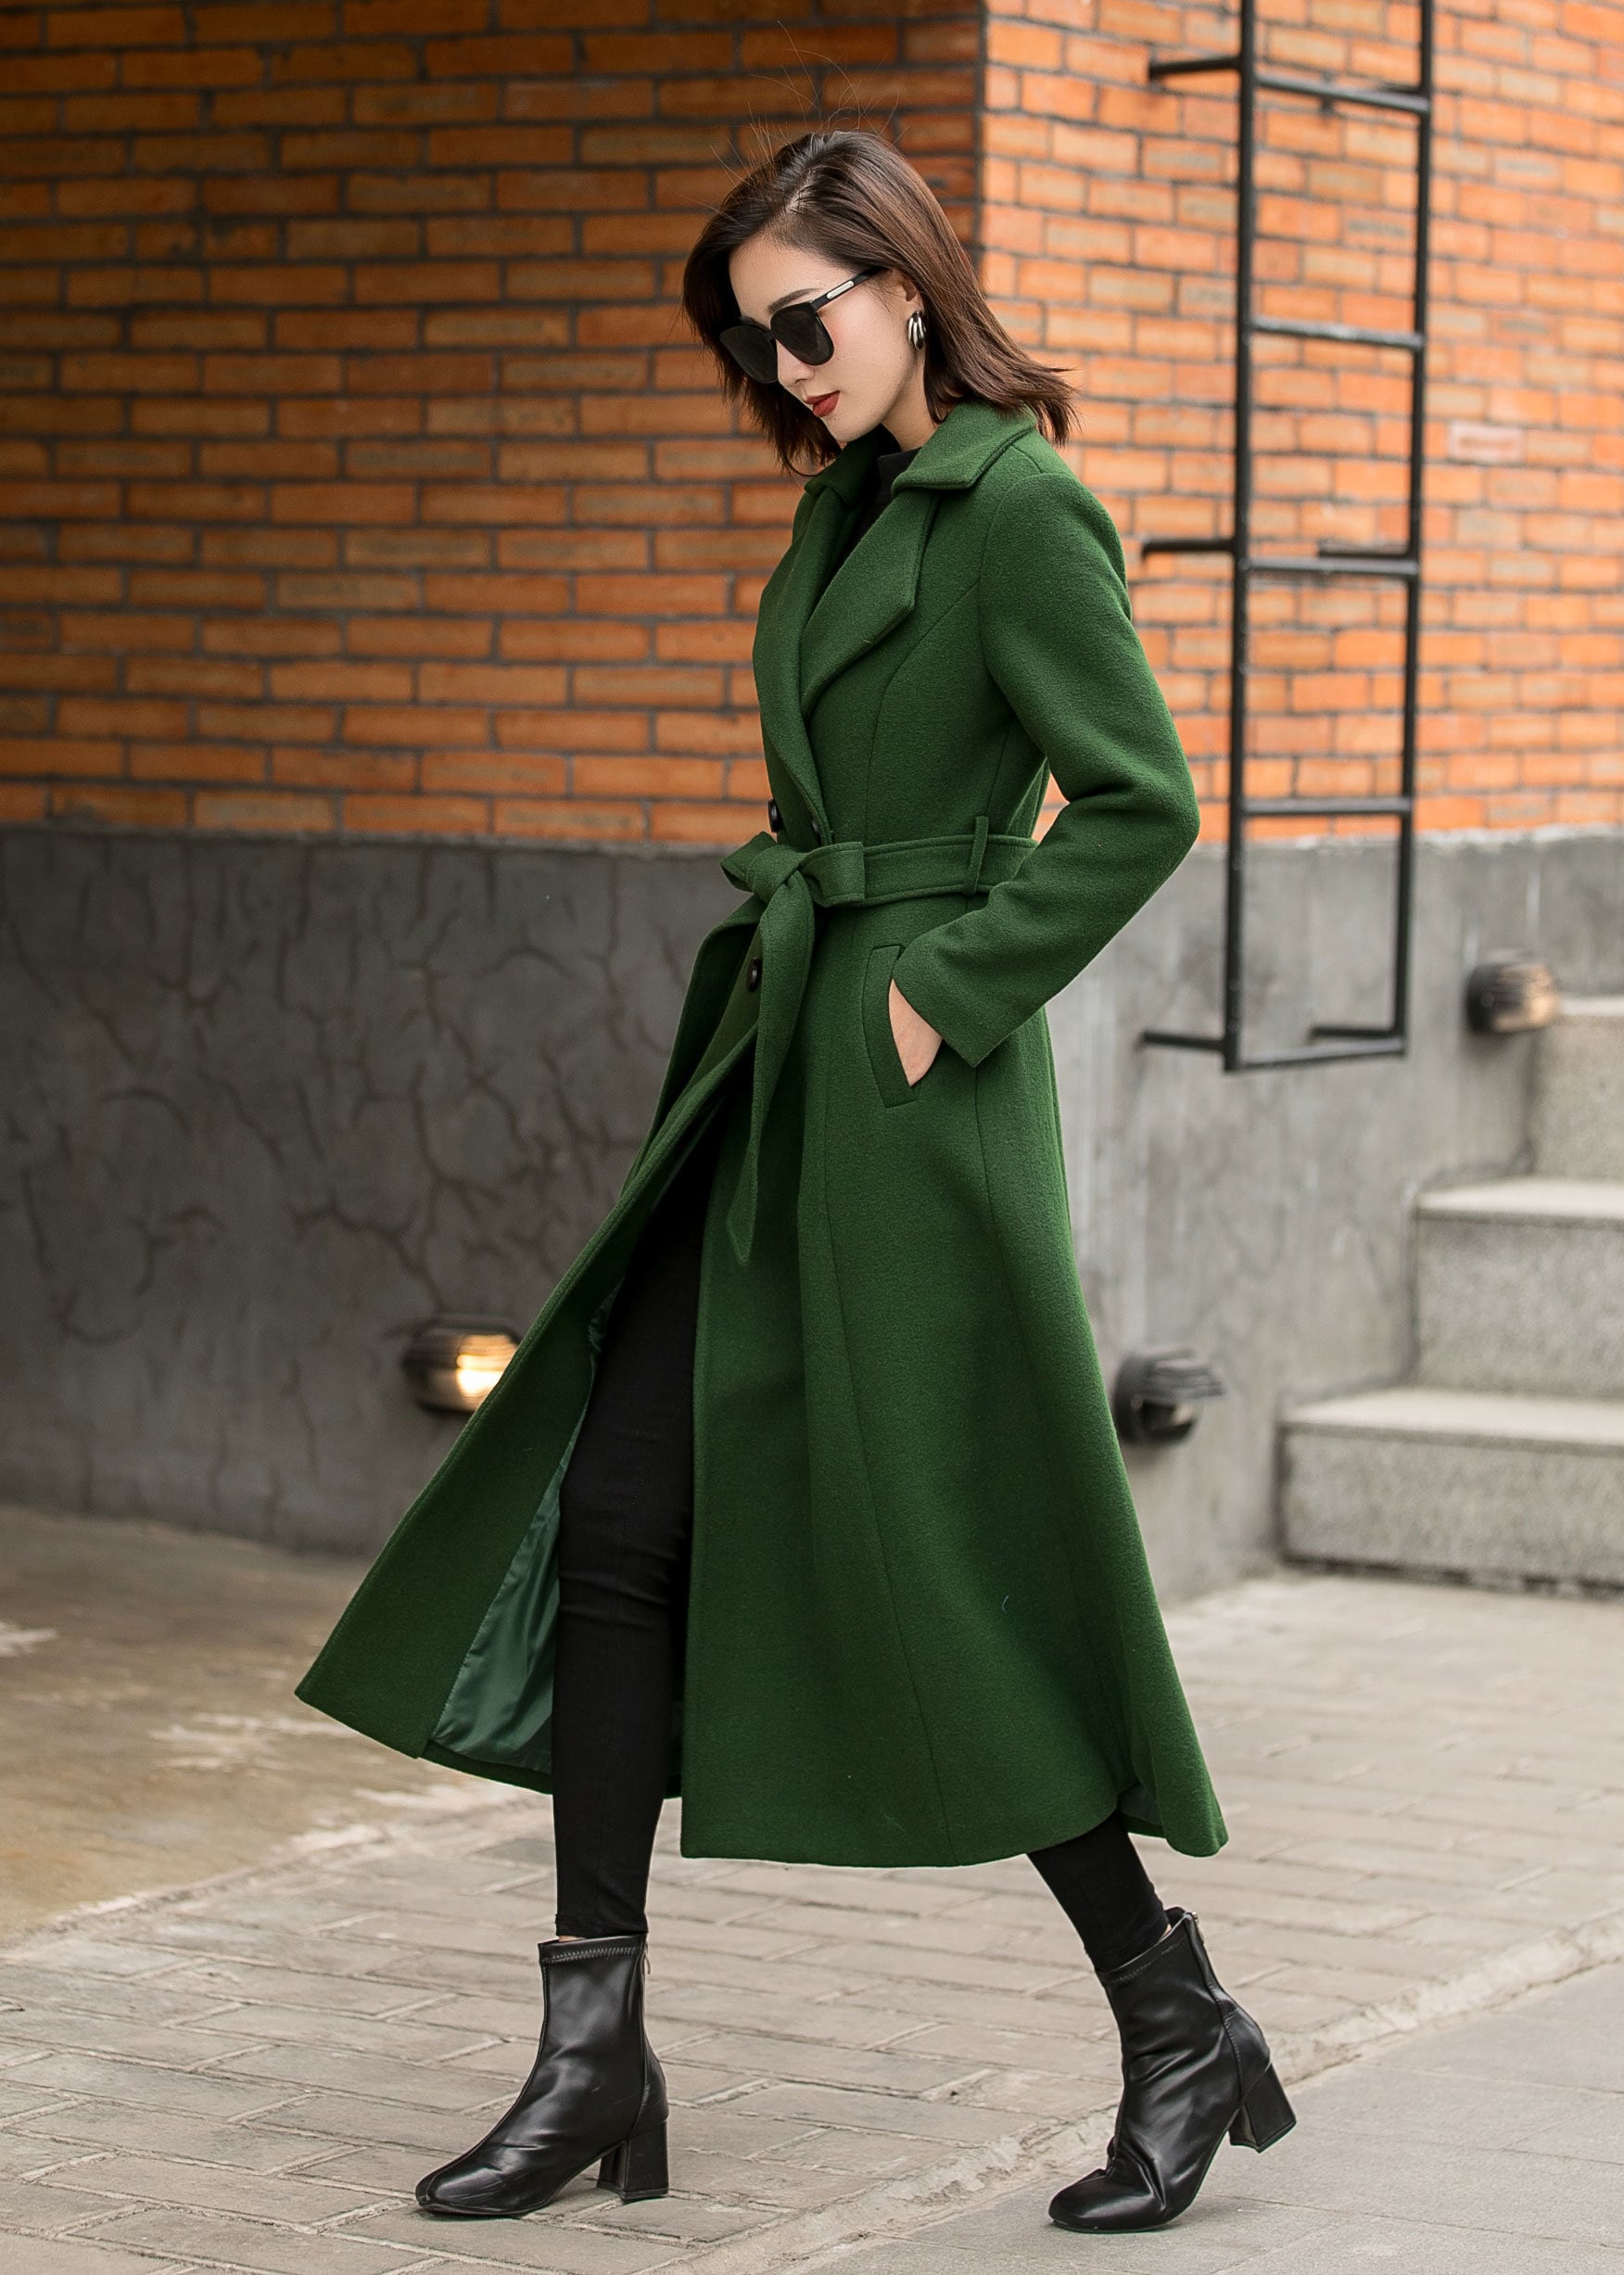 British Style Long Wool Coat in Green, Warm Coat Women, Vintage Winter Coat,  Fit and Flare Solid Coat, Maxi Soft Wool Coat With Belt 2842 -  Canada